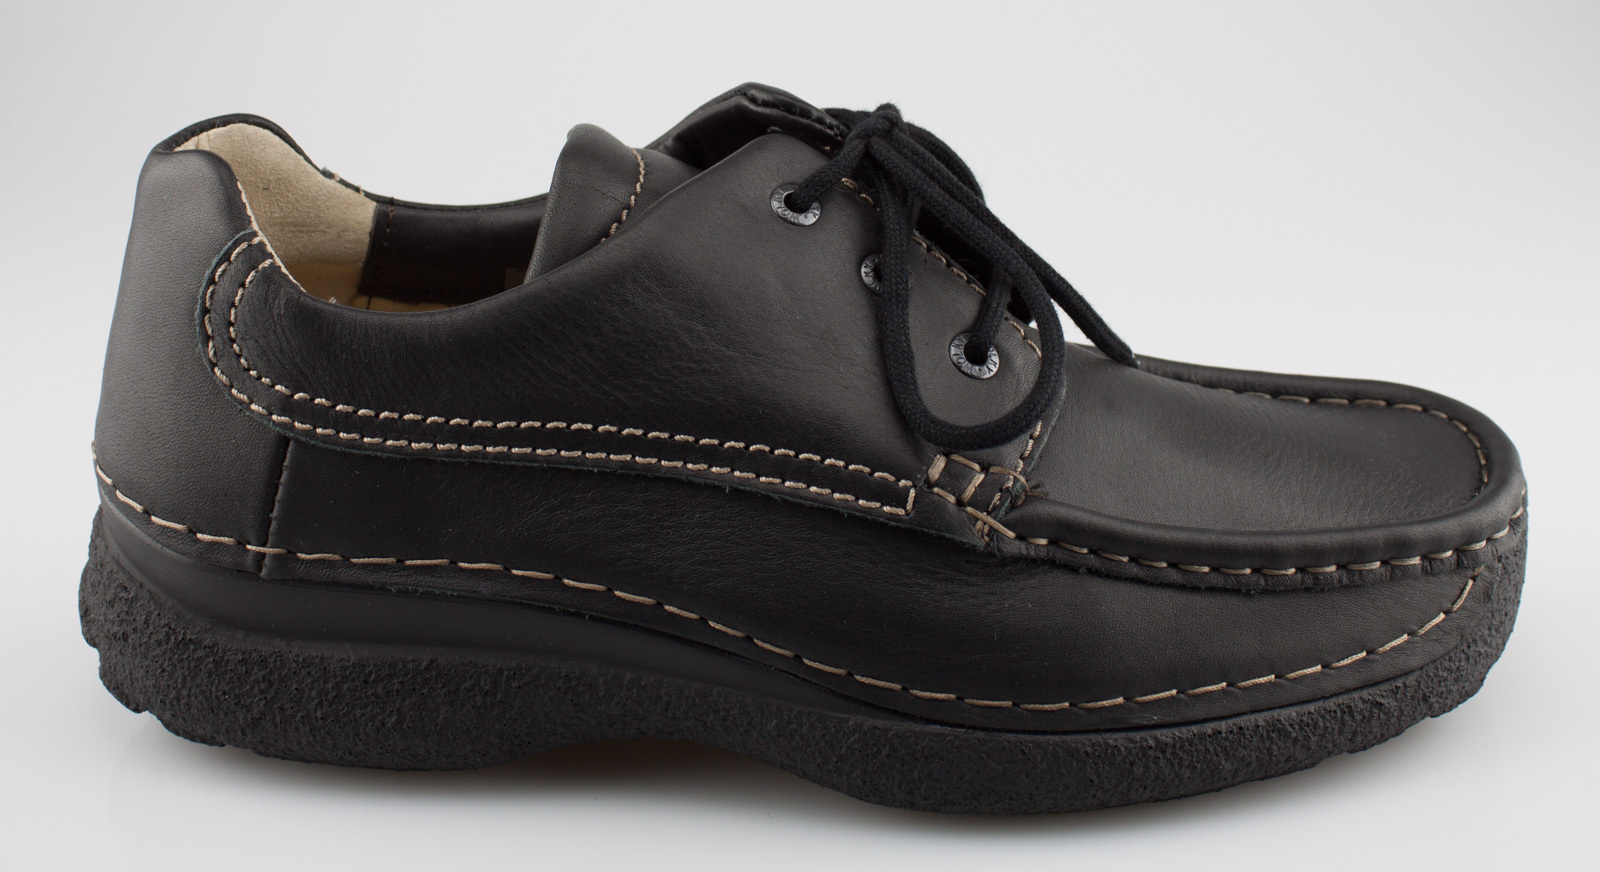 Wolky ROLLING SHOE black oiled 